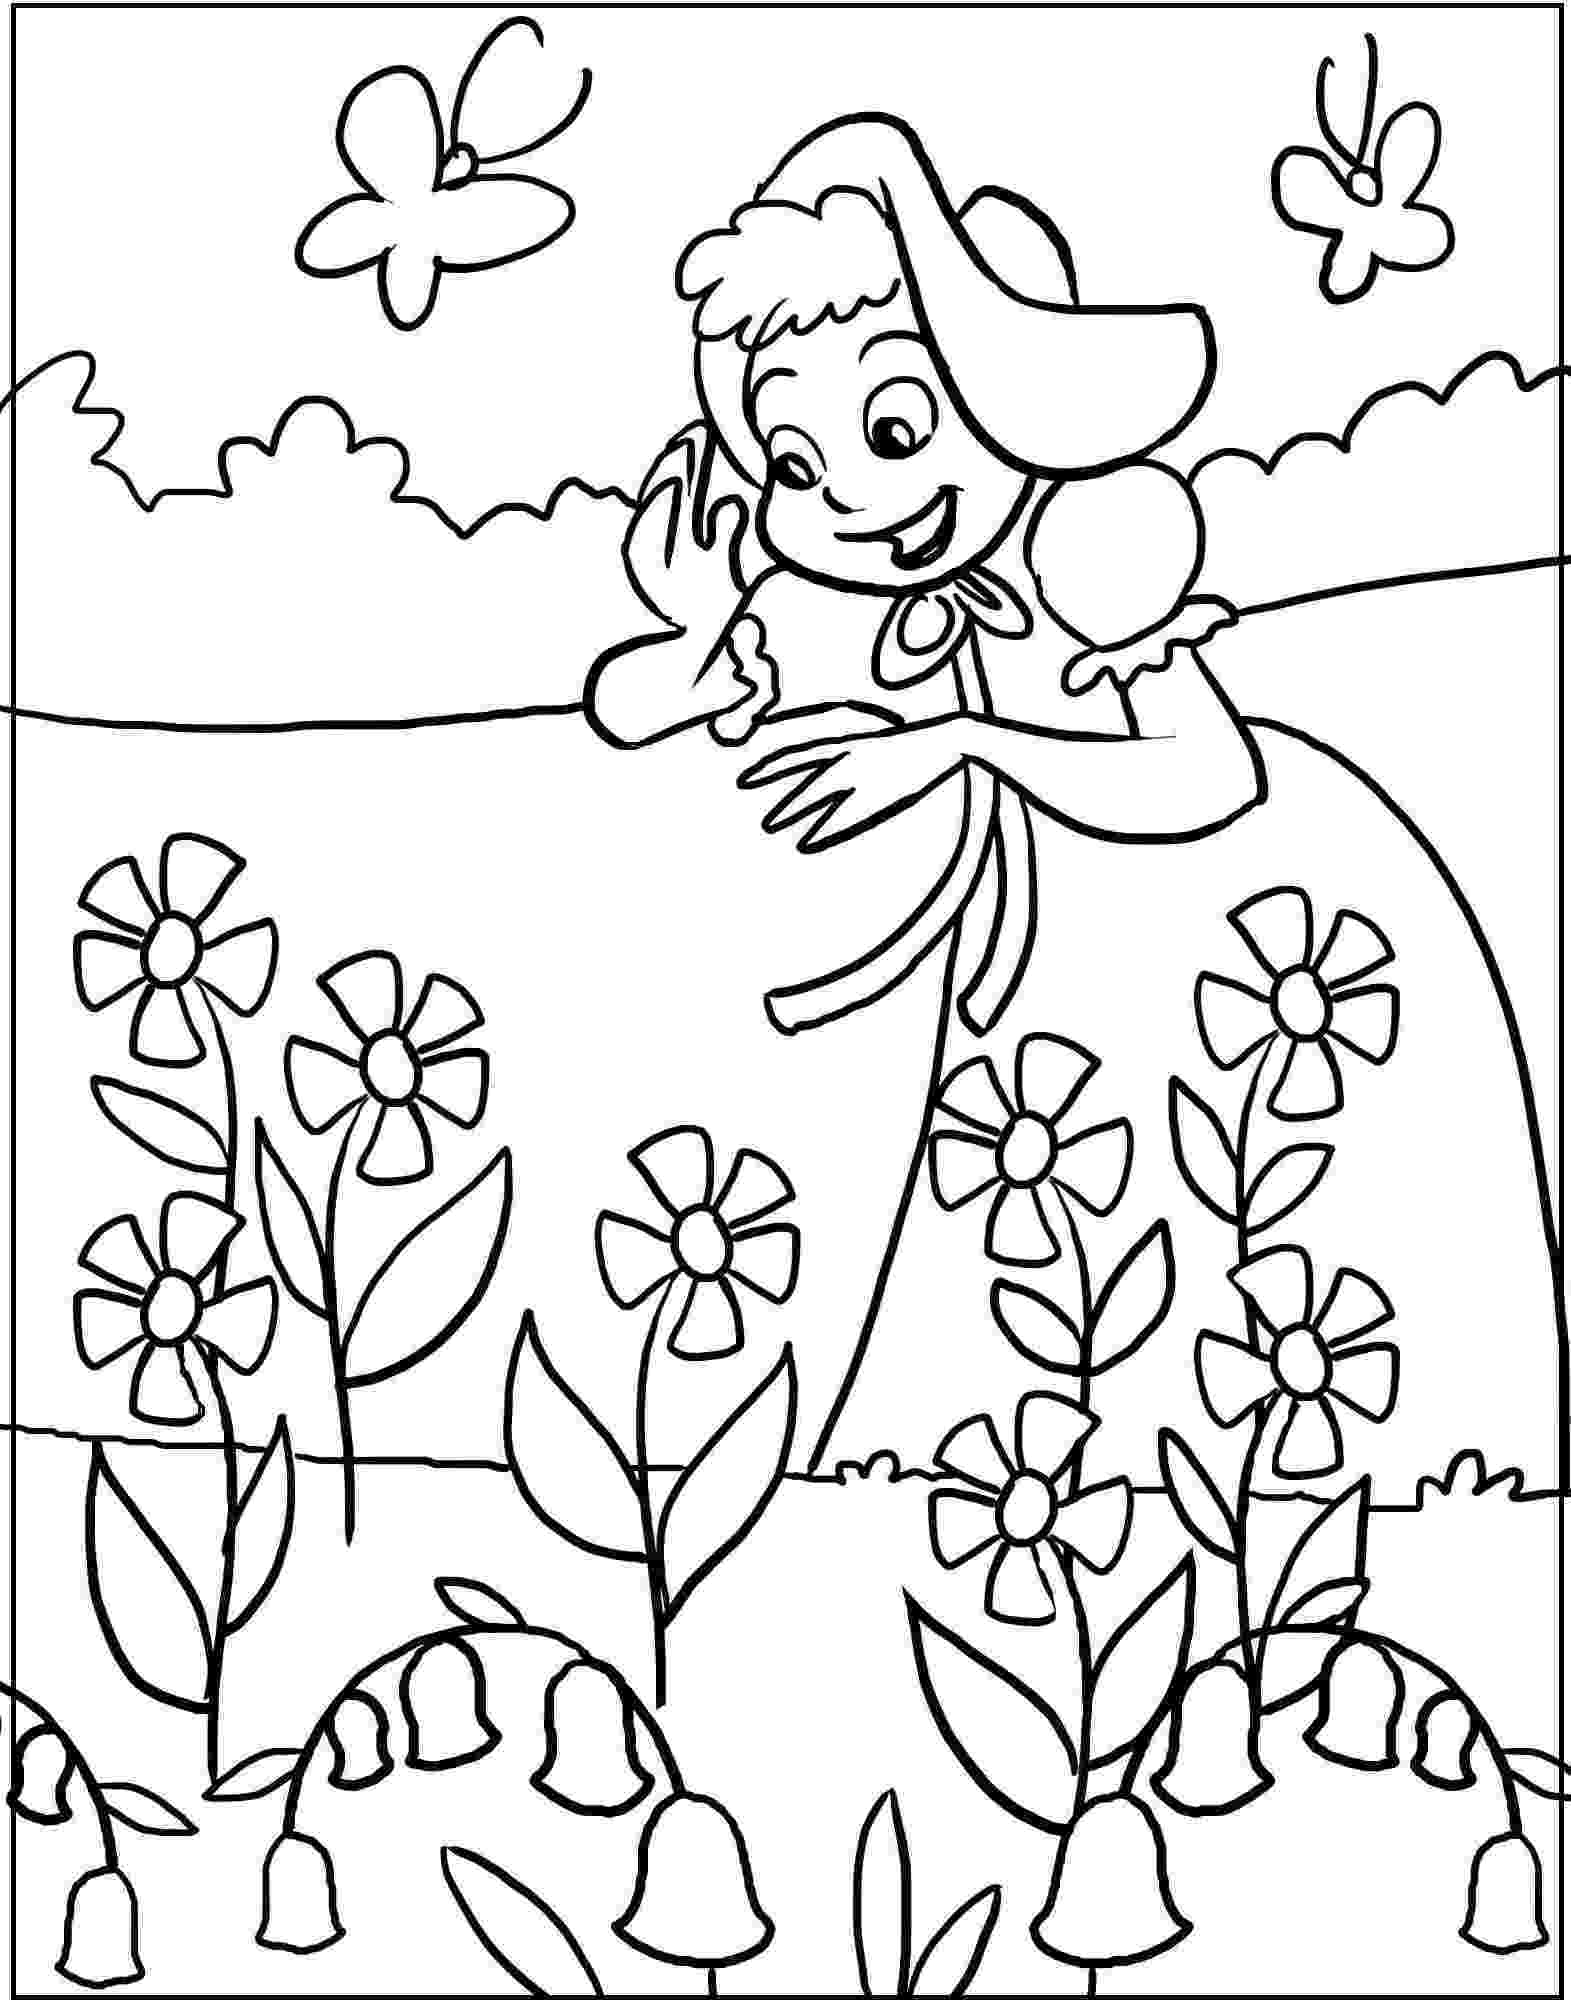 spring coloring sheets for toddlers march coloring pages best coloring pages for kids coloring sheets toddlers spring for 